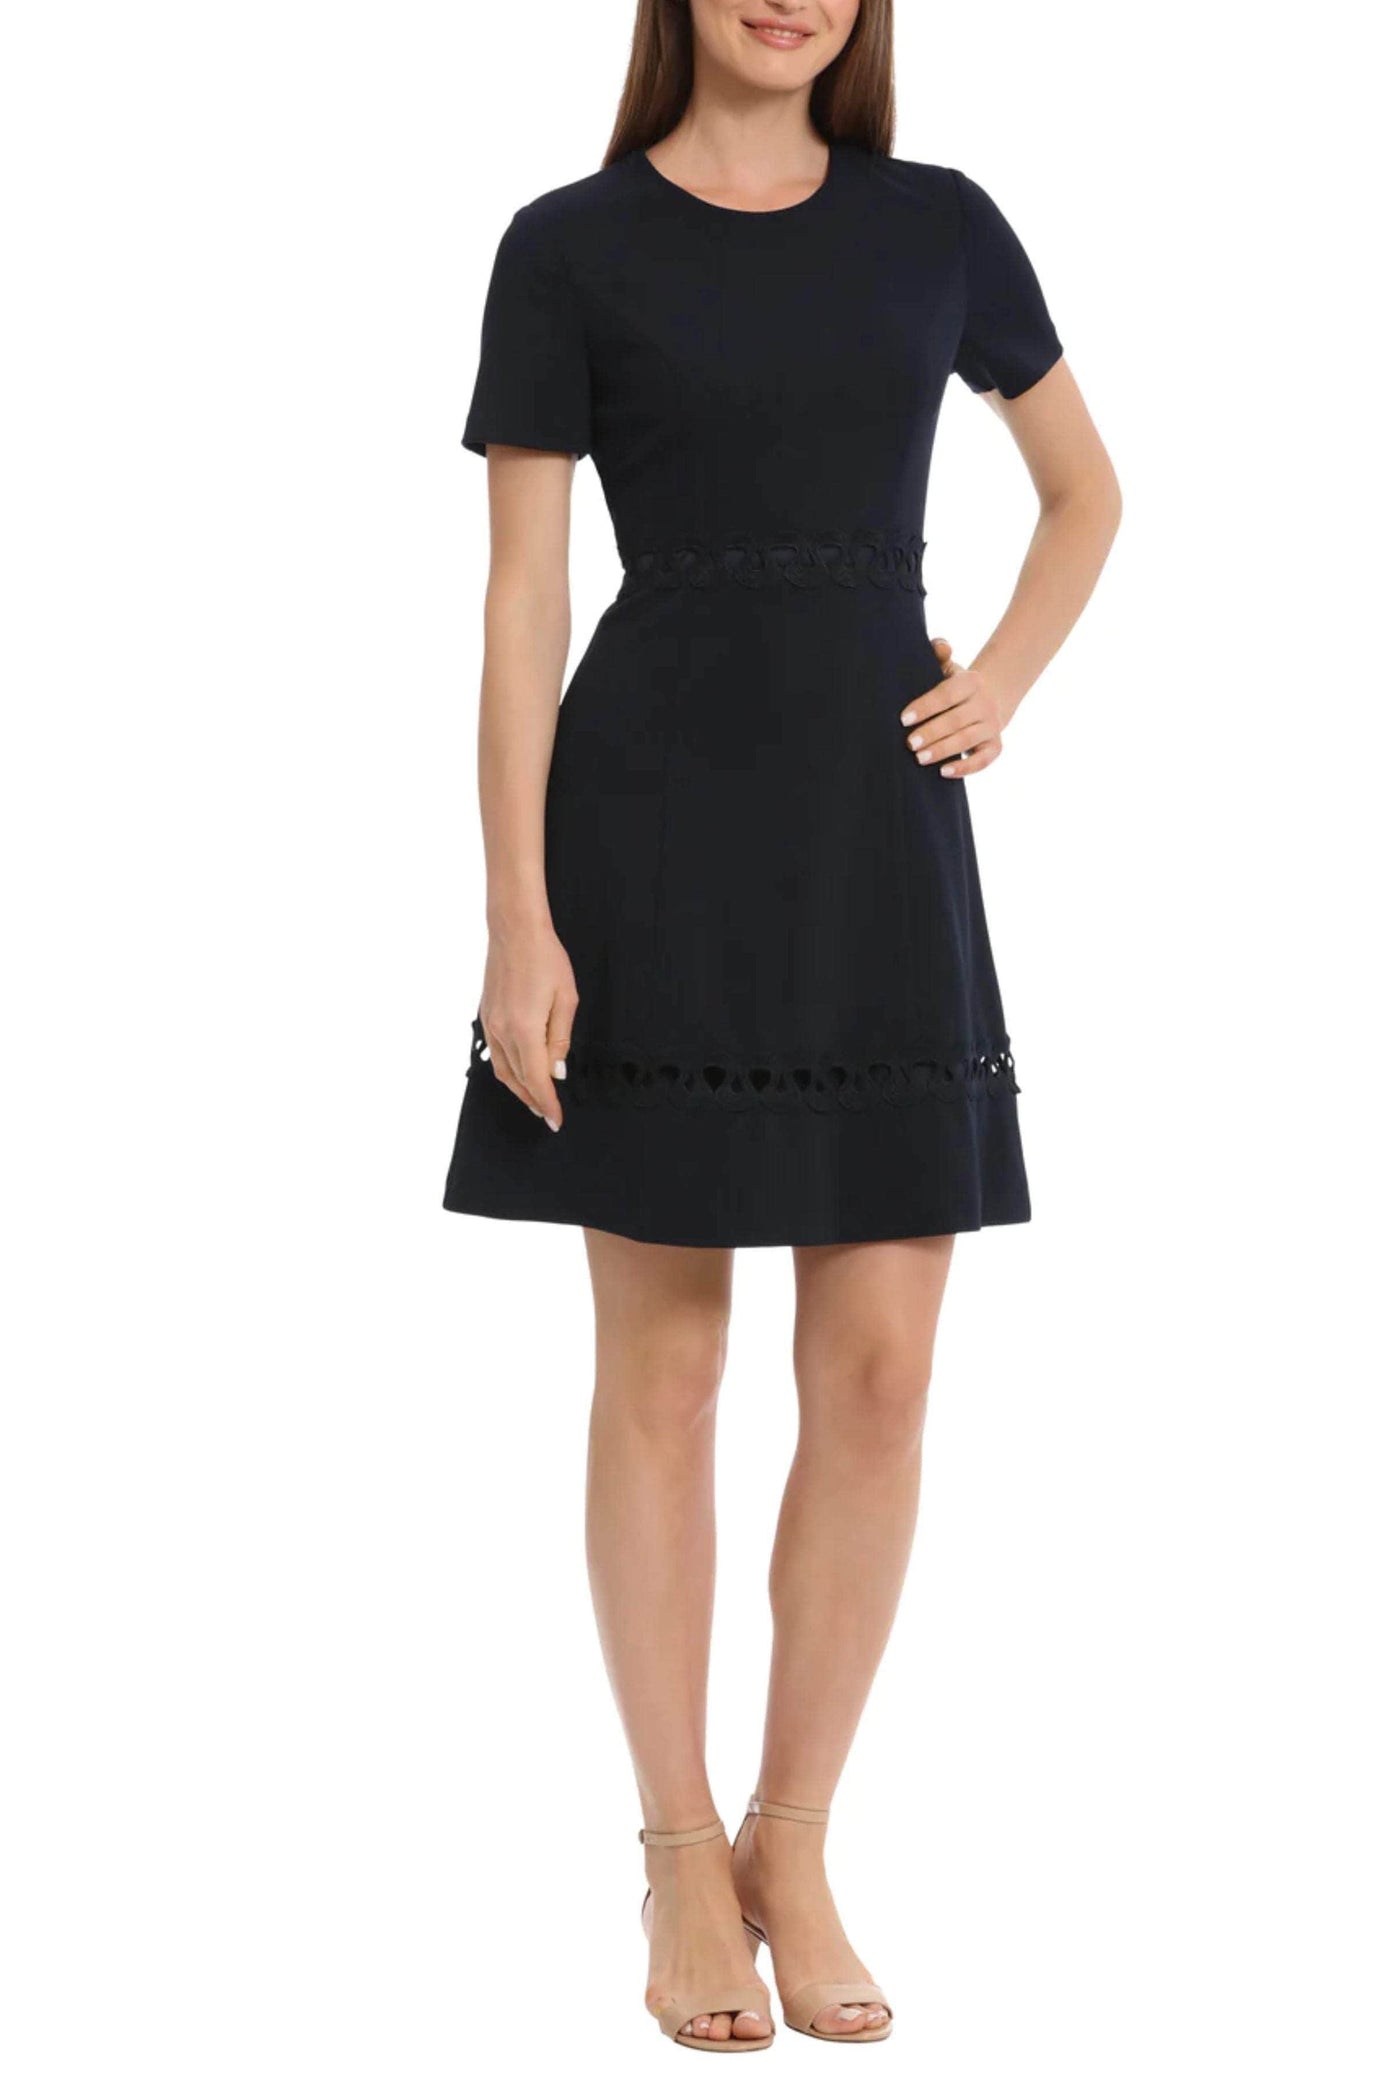 Maggy London G5714M - Short Sleeve A-Line Cocktail Dress Special Occasion Dresses